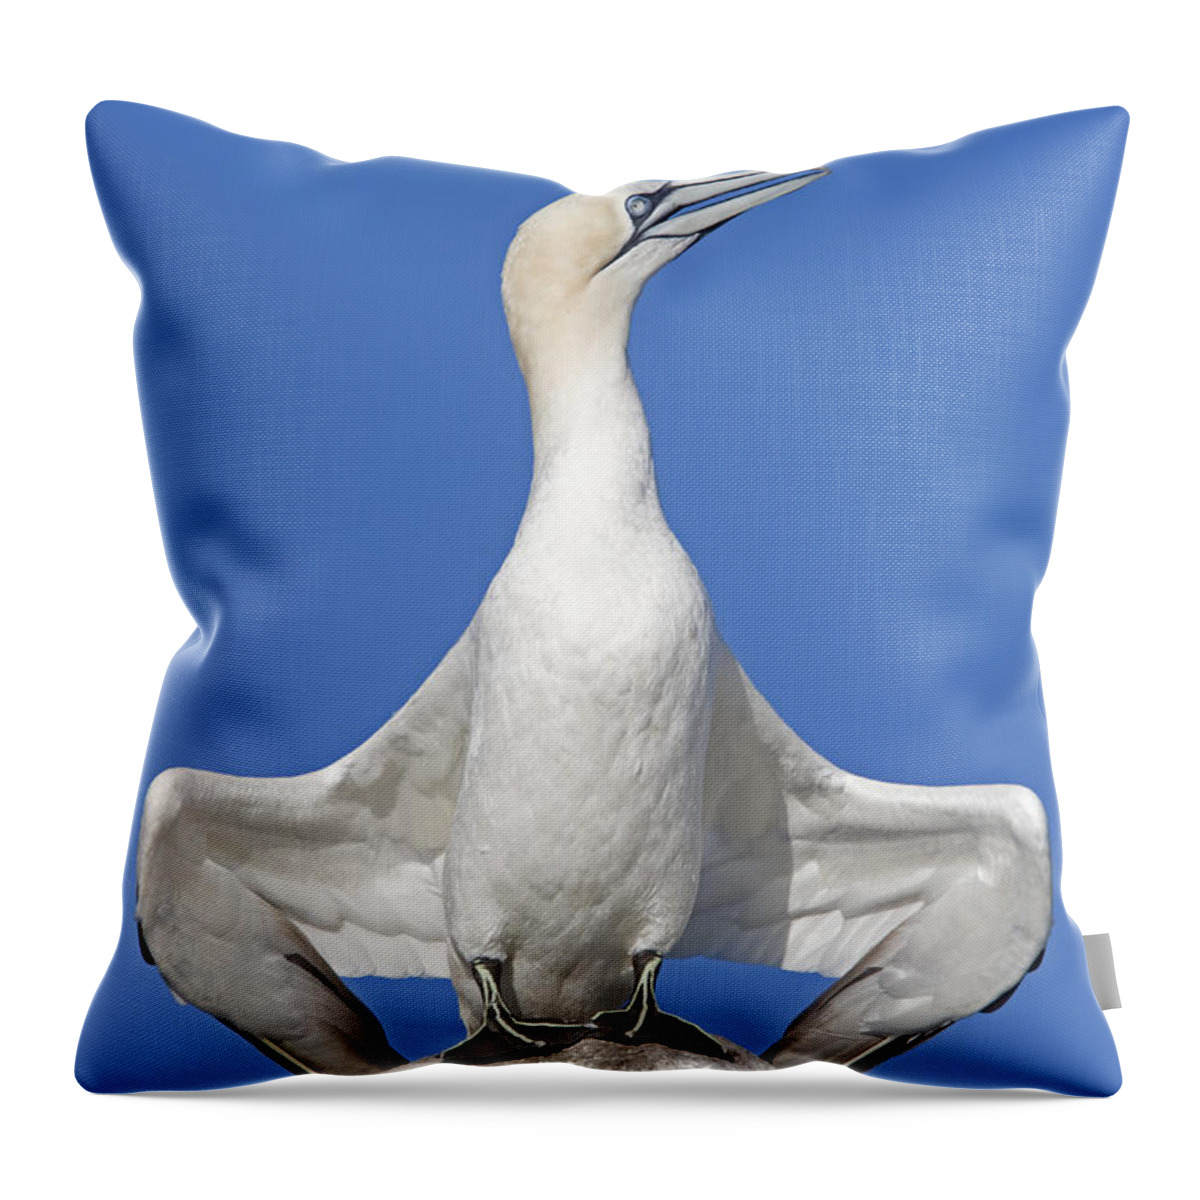 Flpa Throw Pillow featuring the photograph Northern Gannet Displaying Great Saltee by Dickie Duckett